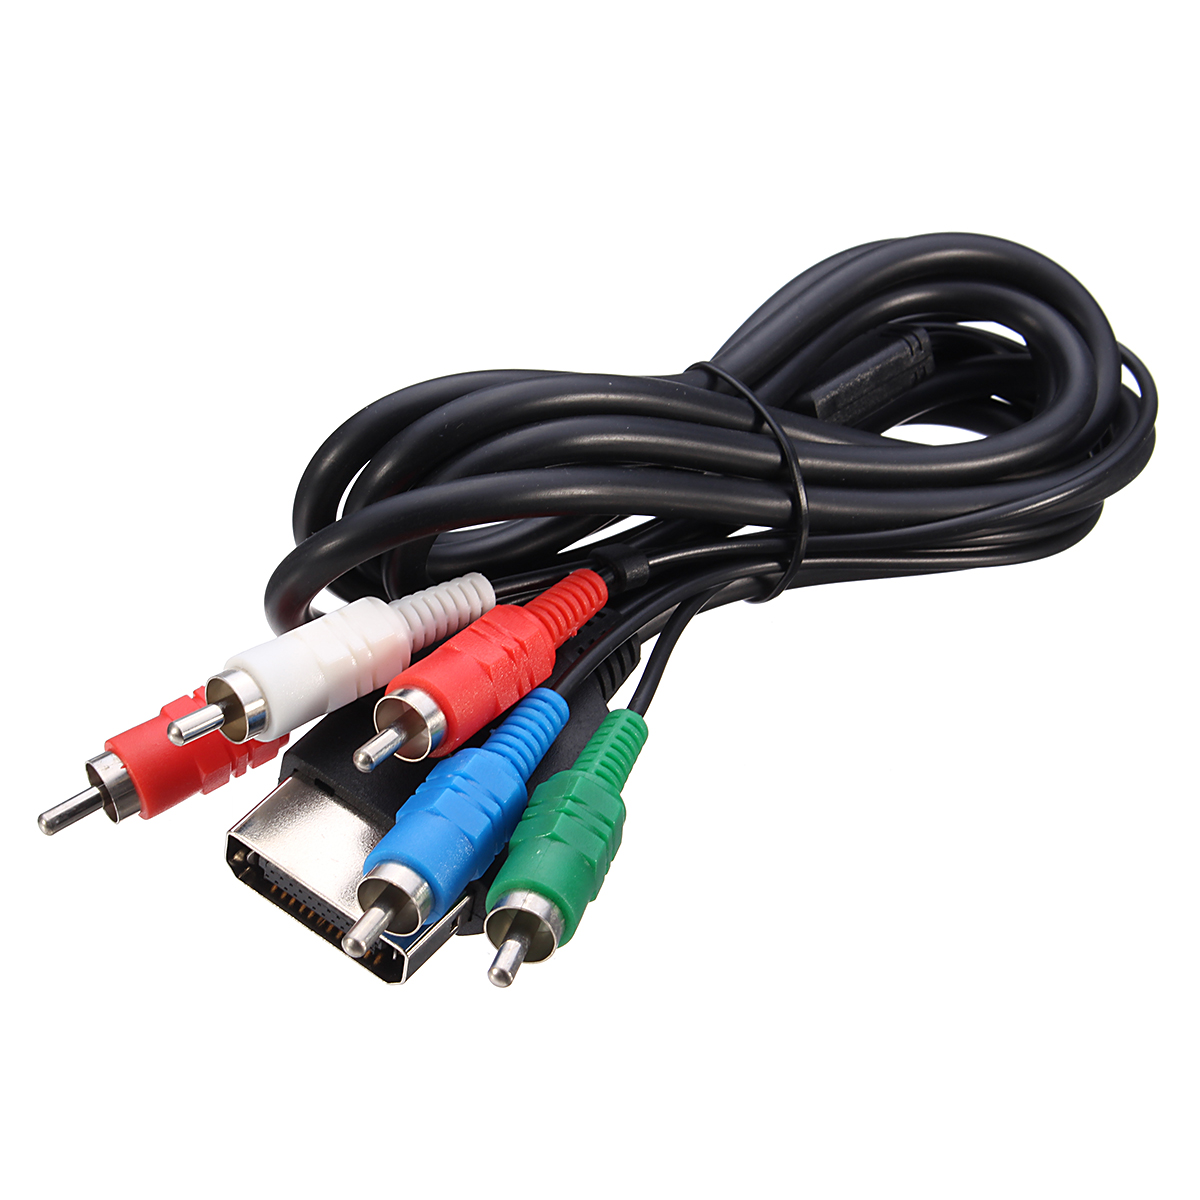 HD TV Component Composite 5 RCA AC Stereo Sound Audio Video Cable Cord for XBOX 9